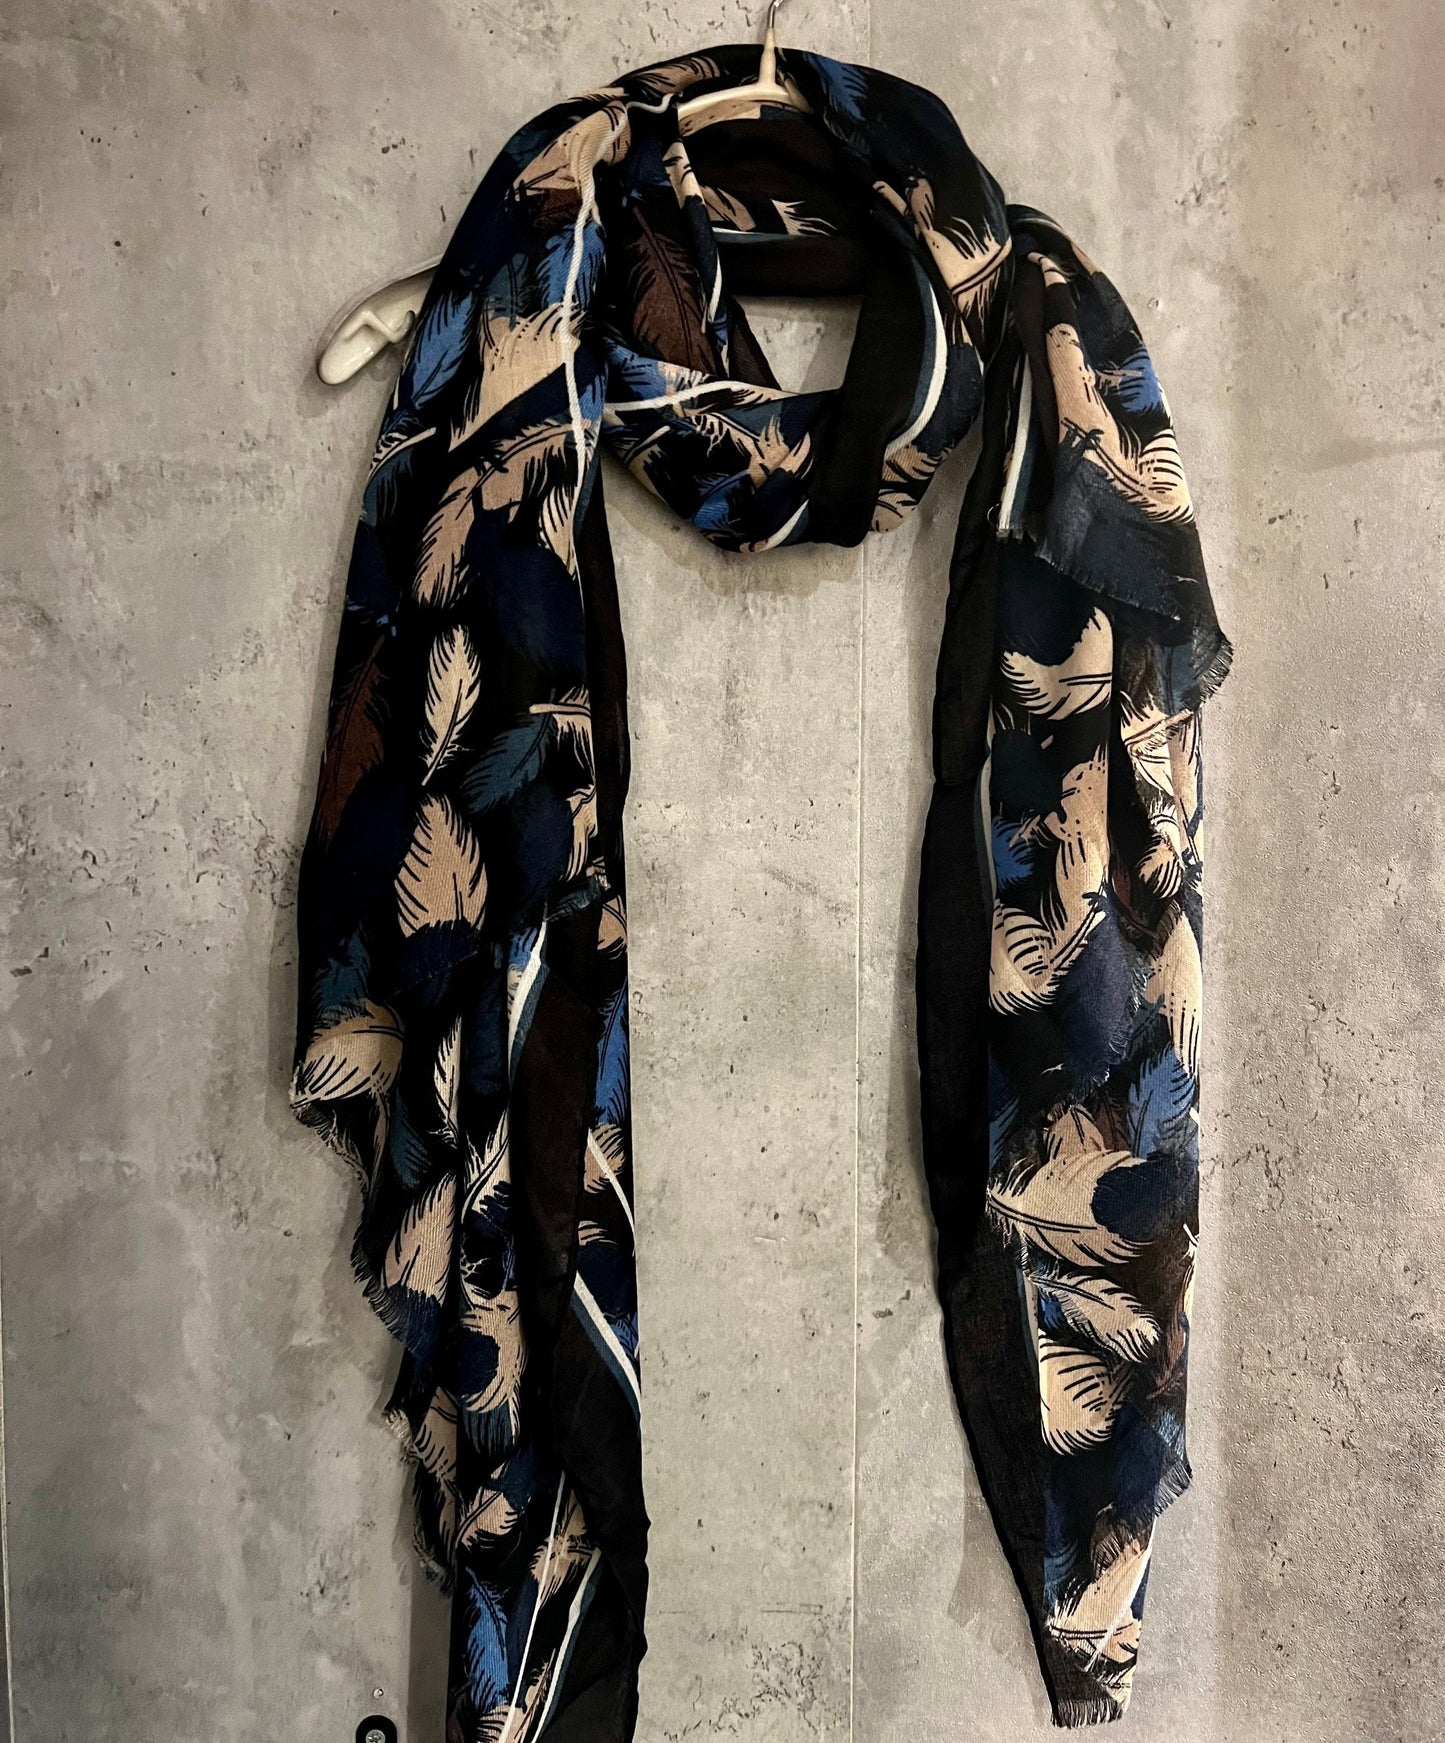 Black Cotton Scarf with Floating Blue Beige Feathers – A Stylish and Versatile Gift for Her